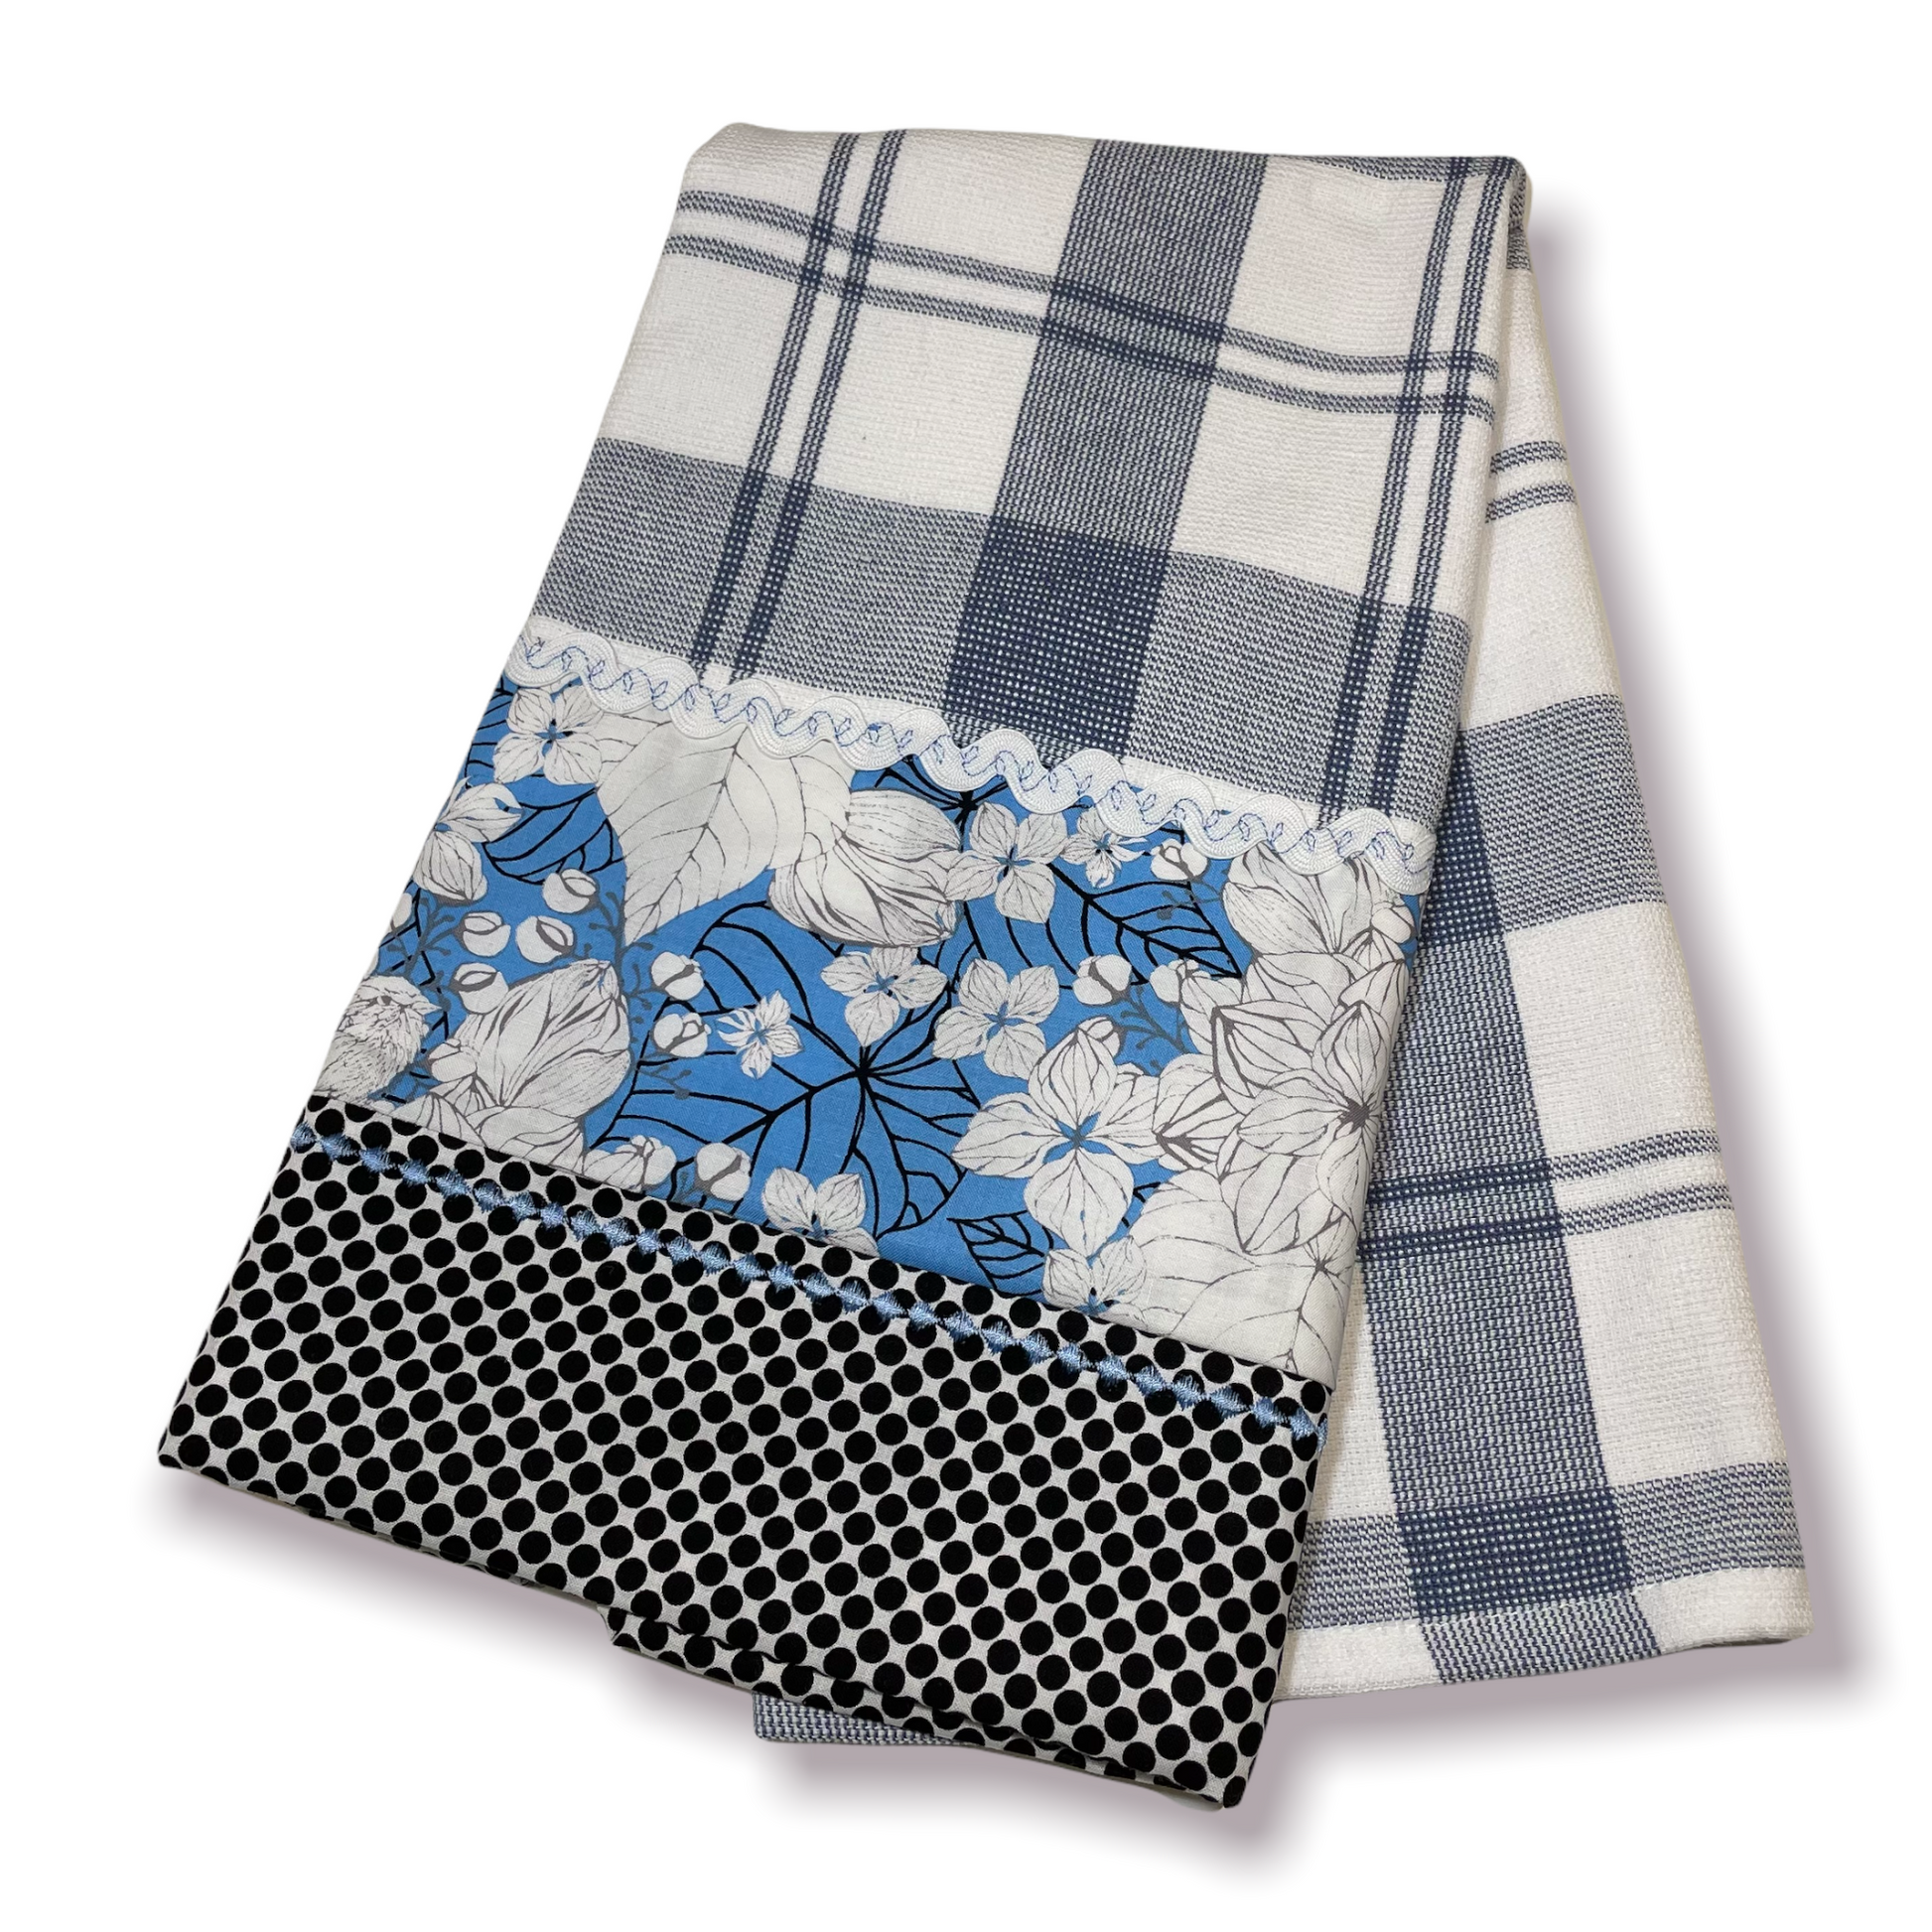 Blue and Black Decorative Dish Towel. Farmhouse Styled Tea towels. Part of a coordinated collection of kitchen decor by Home Stitchery Decor. Shop the look or make your own with tutorials on DIY Farmhouse Decor on the Home Stitchery Decor YouTube Channel.